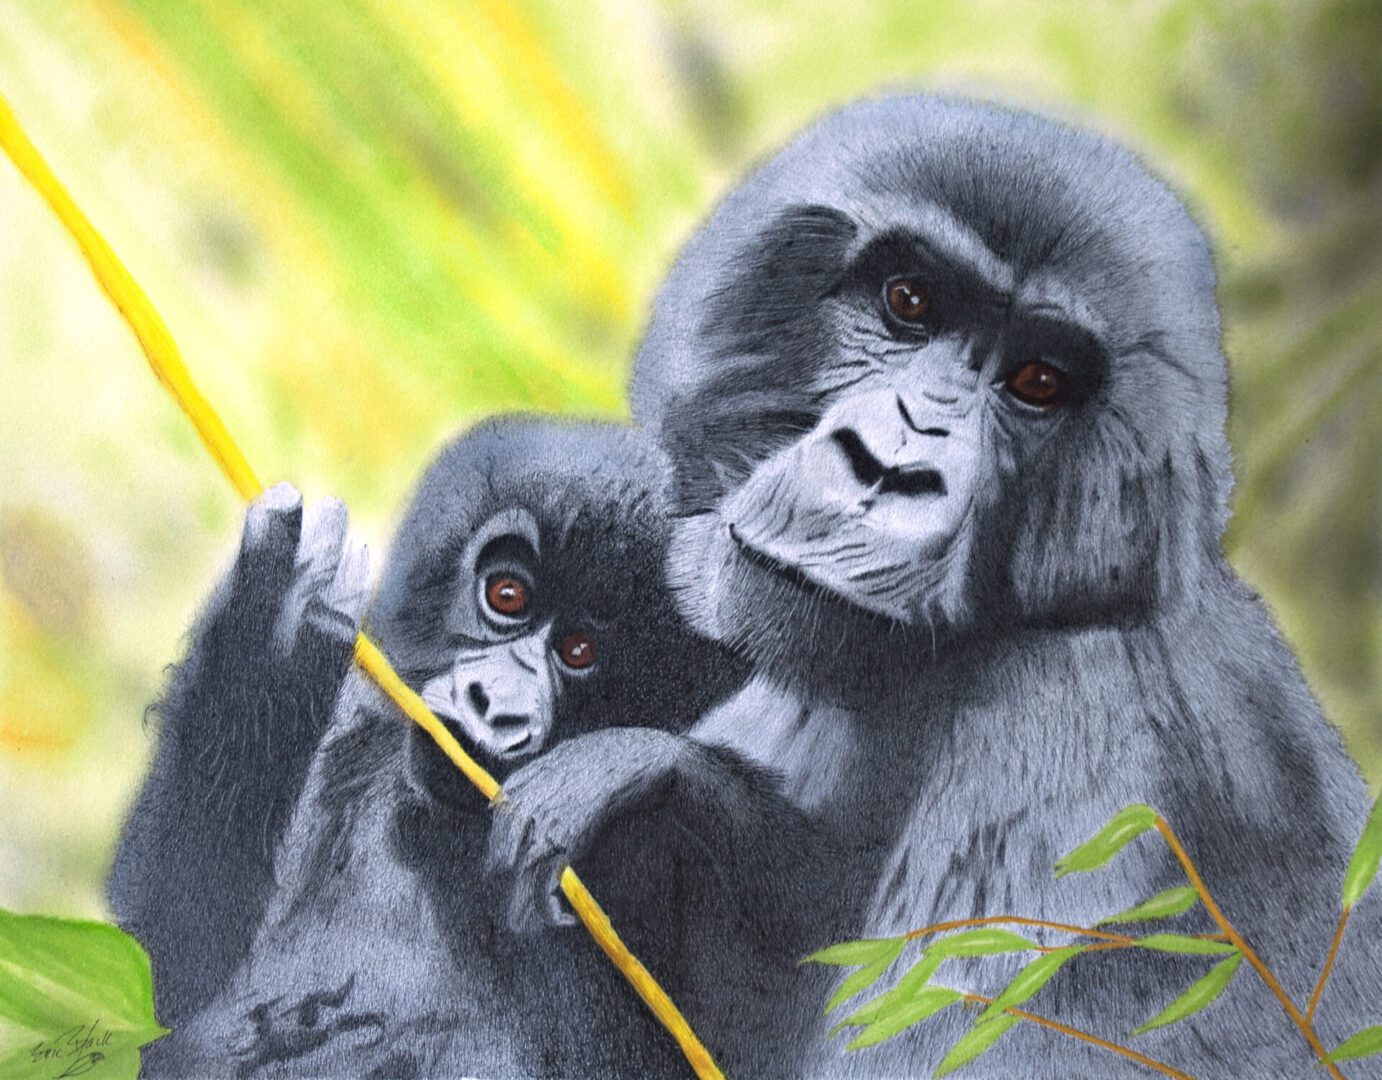 A painting of two gorilla babies in the wild.